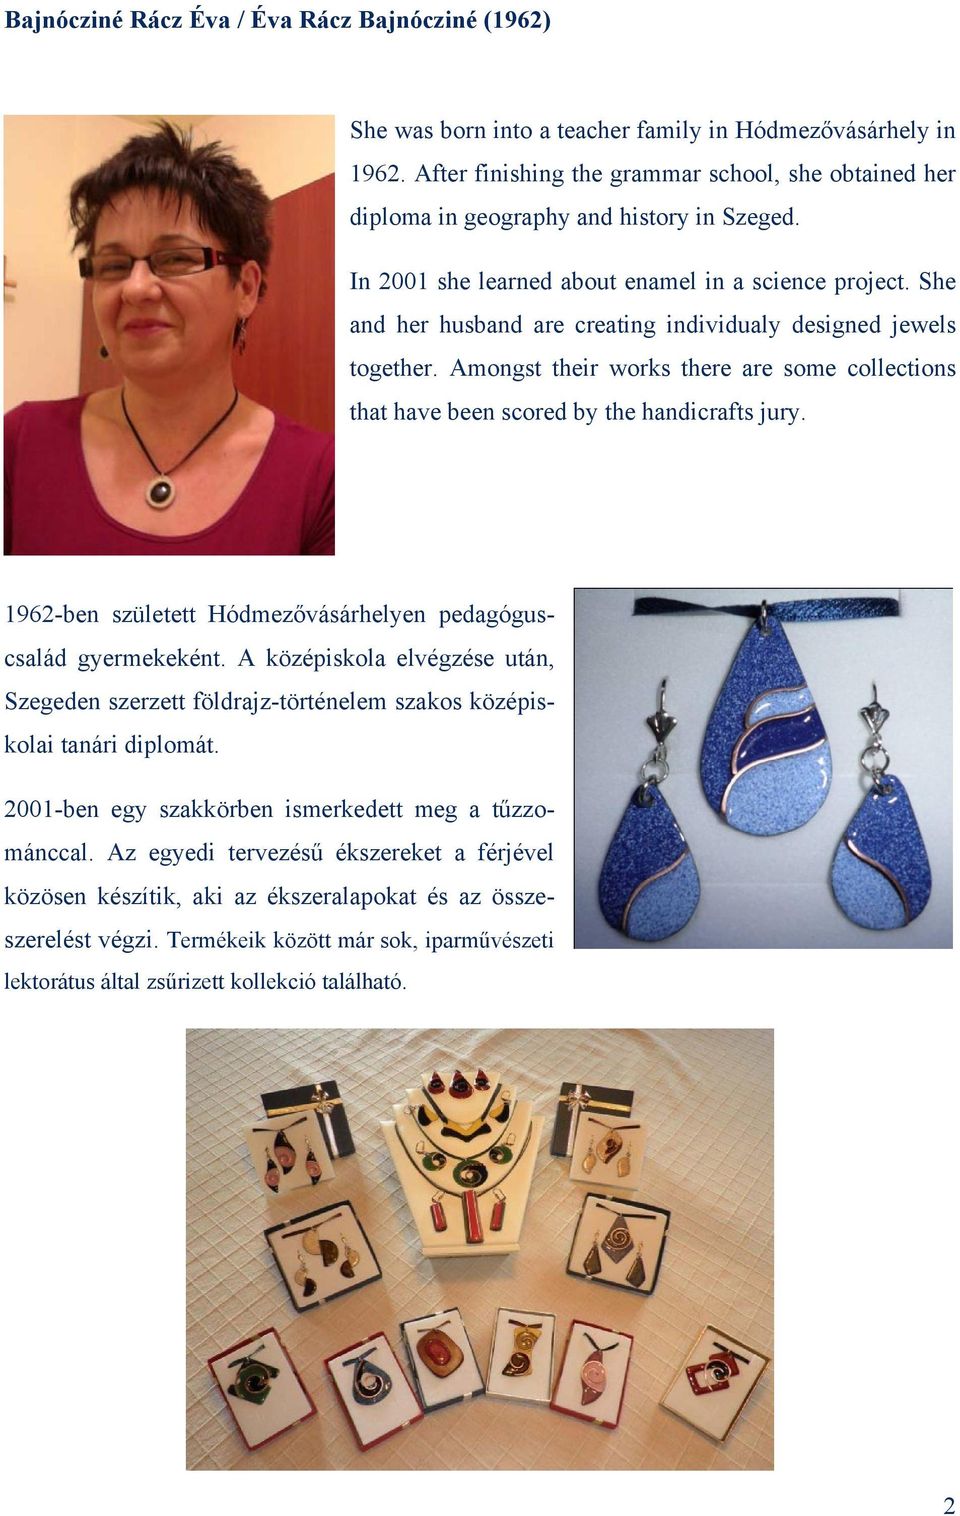 She and her husband are creating individualy designed jewels together. Amongst their works there are some collections that have been scored by the handicrafts jury.